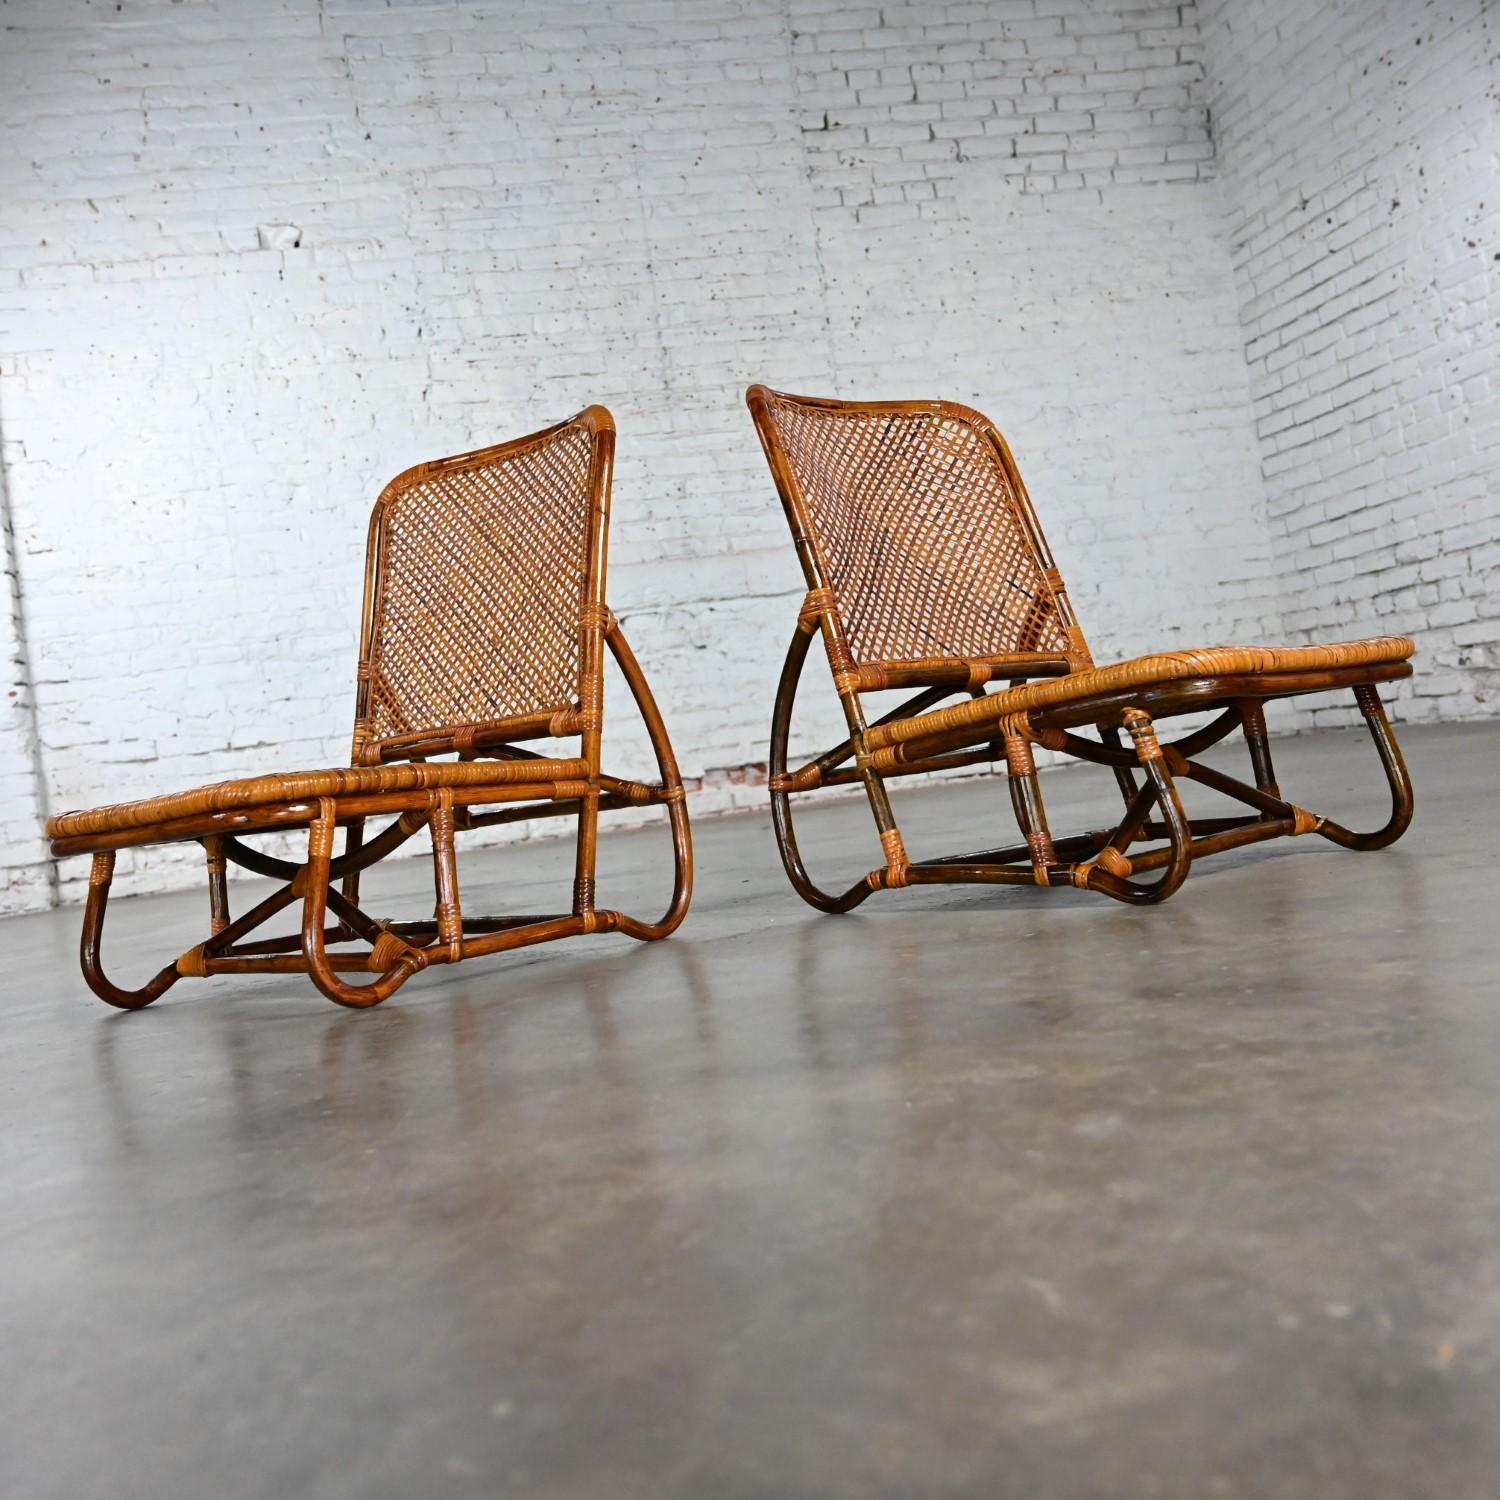 MCM Coastal Rattan & Wicker Low Legless or Zaisu Lounge Chairs Style Calif Asia In Good Condition For Sale In Topeka, KS